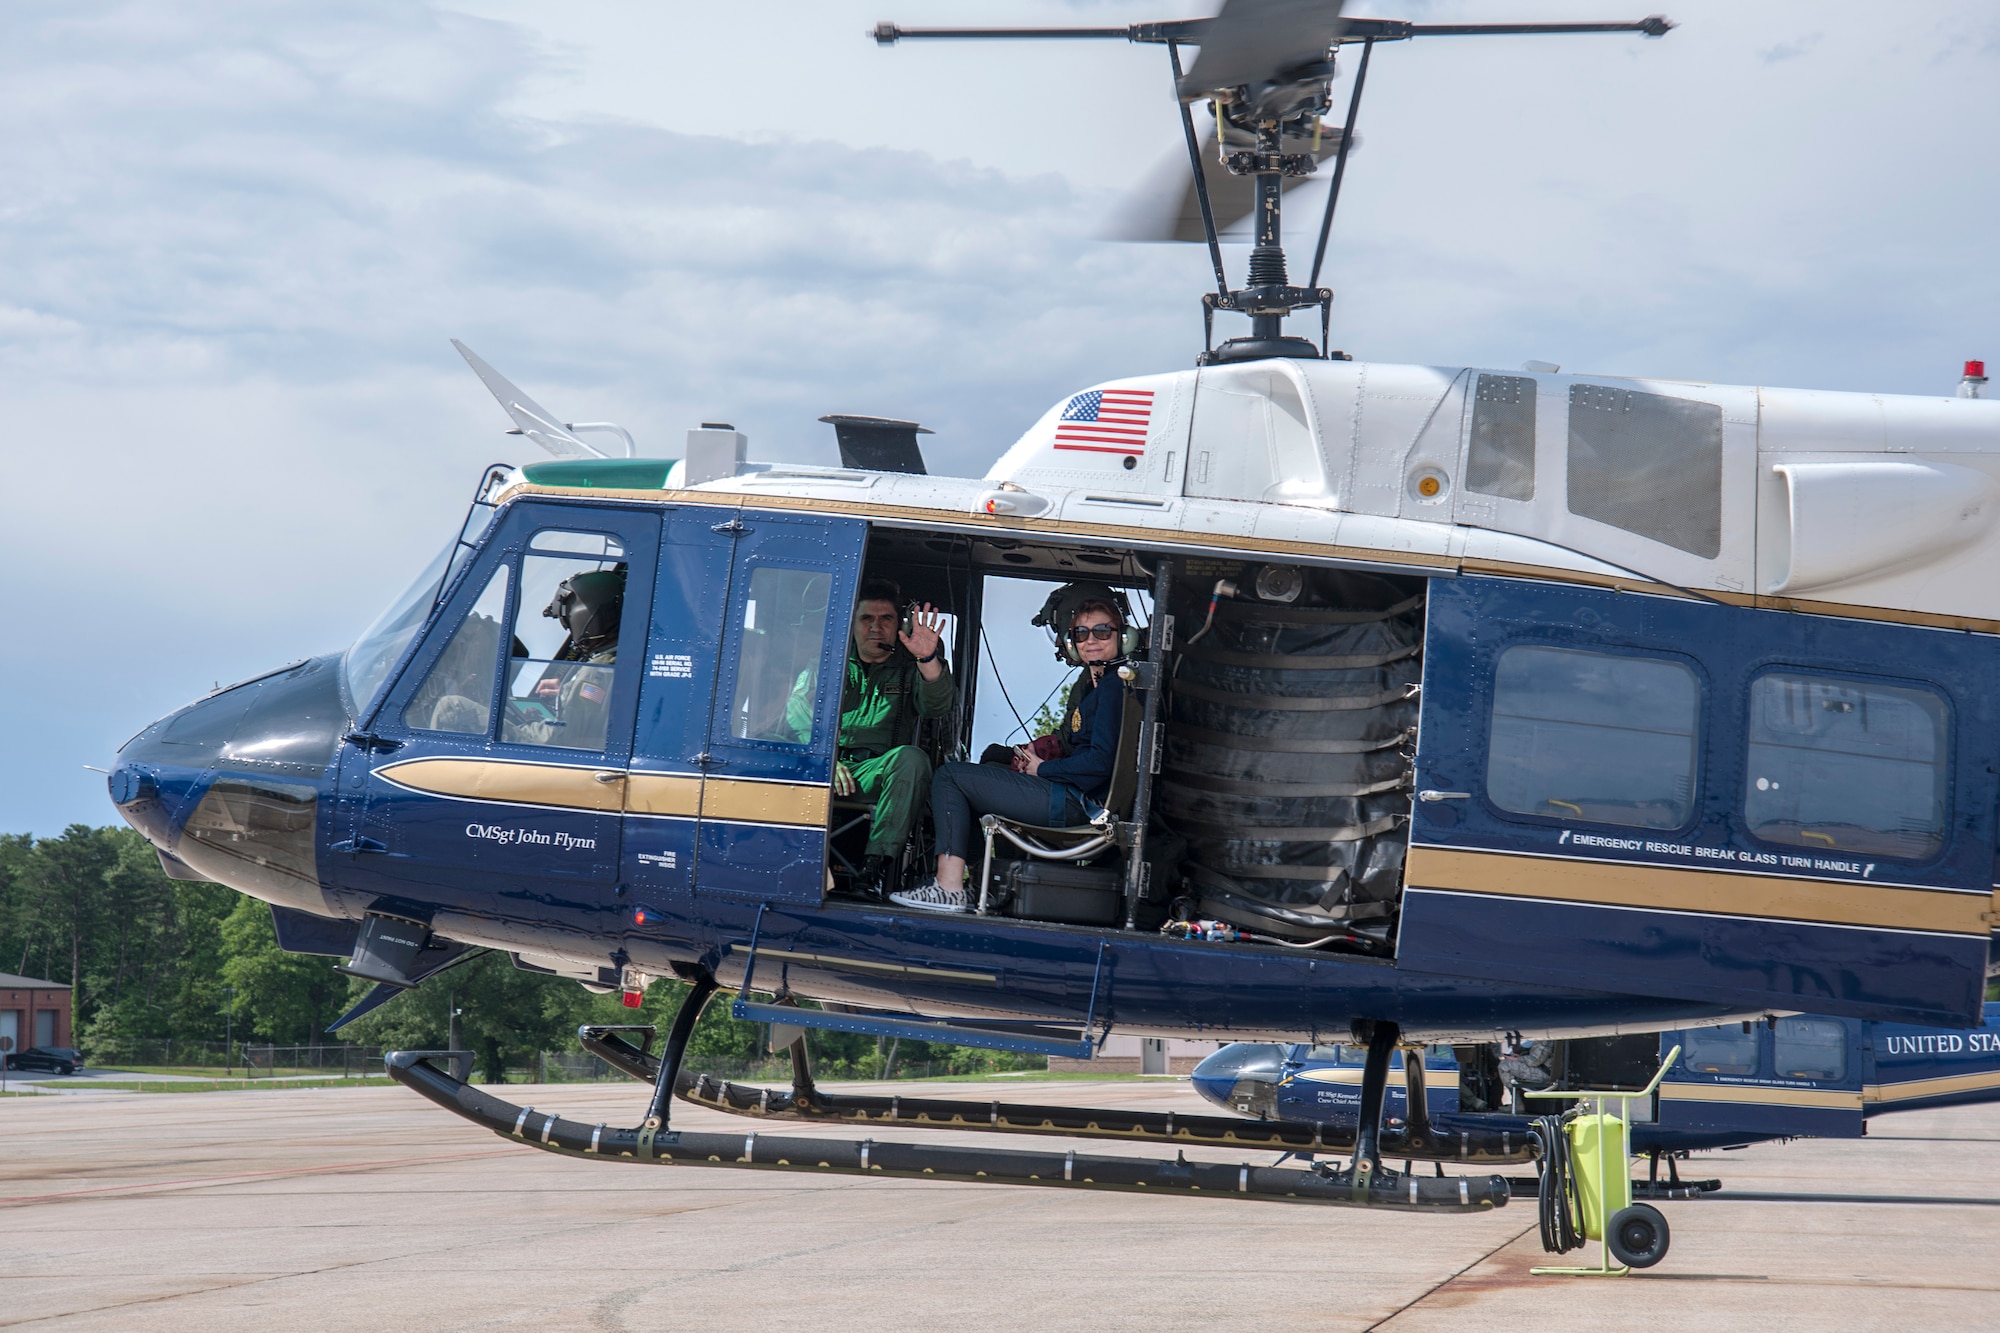 Maj. Gen. Laurian Anastasof, Romanian Air Force chief of air staff (center), waves during takeoff in a 1st Helicopter Squadron UH-1N Huey helicopter at Joint Base Andrews, Md., May 23, 2016. Anastasof and his wife, Karmen Anastasof, flew with the 1st HS as part of the U.S. Air Force�s Counterpart Visit Program. (U.S. Air Force photo by Airman Gabrielle Spalding)